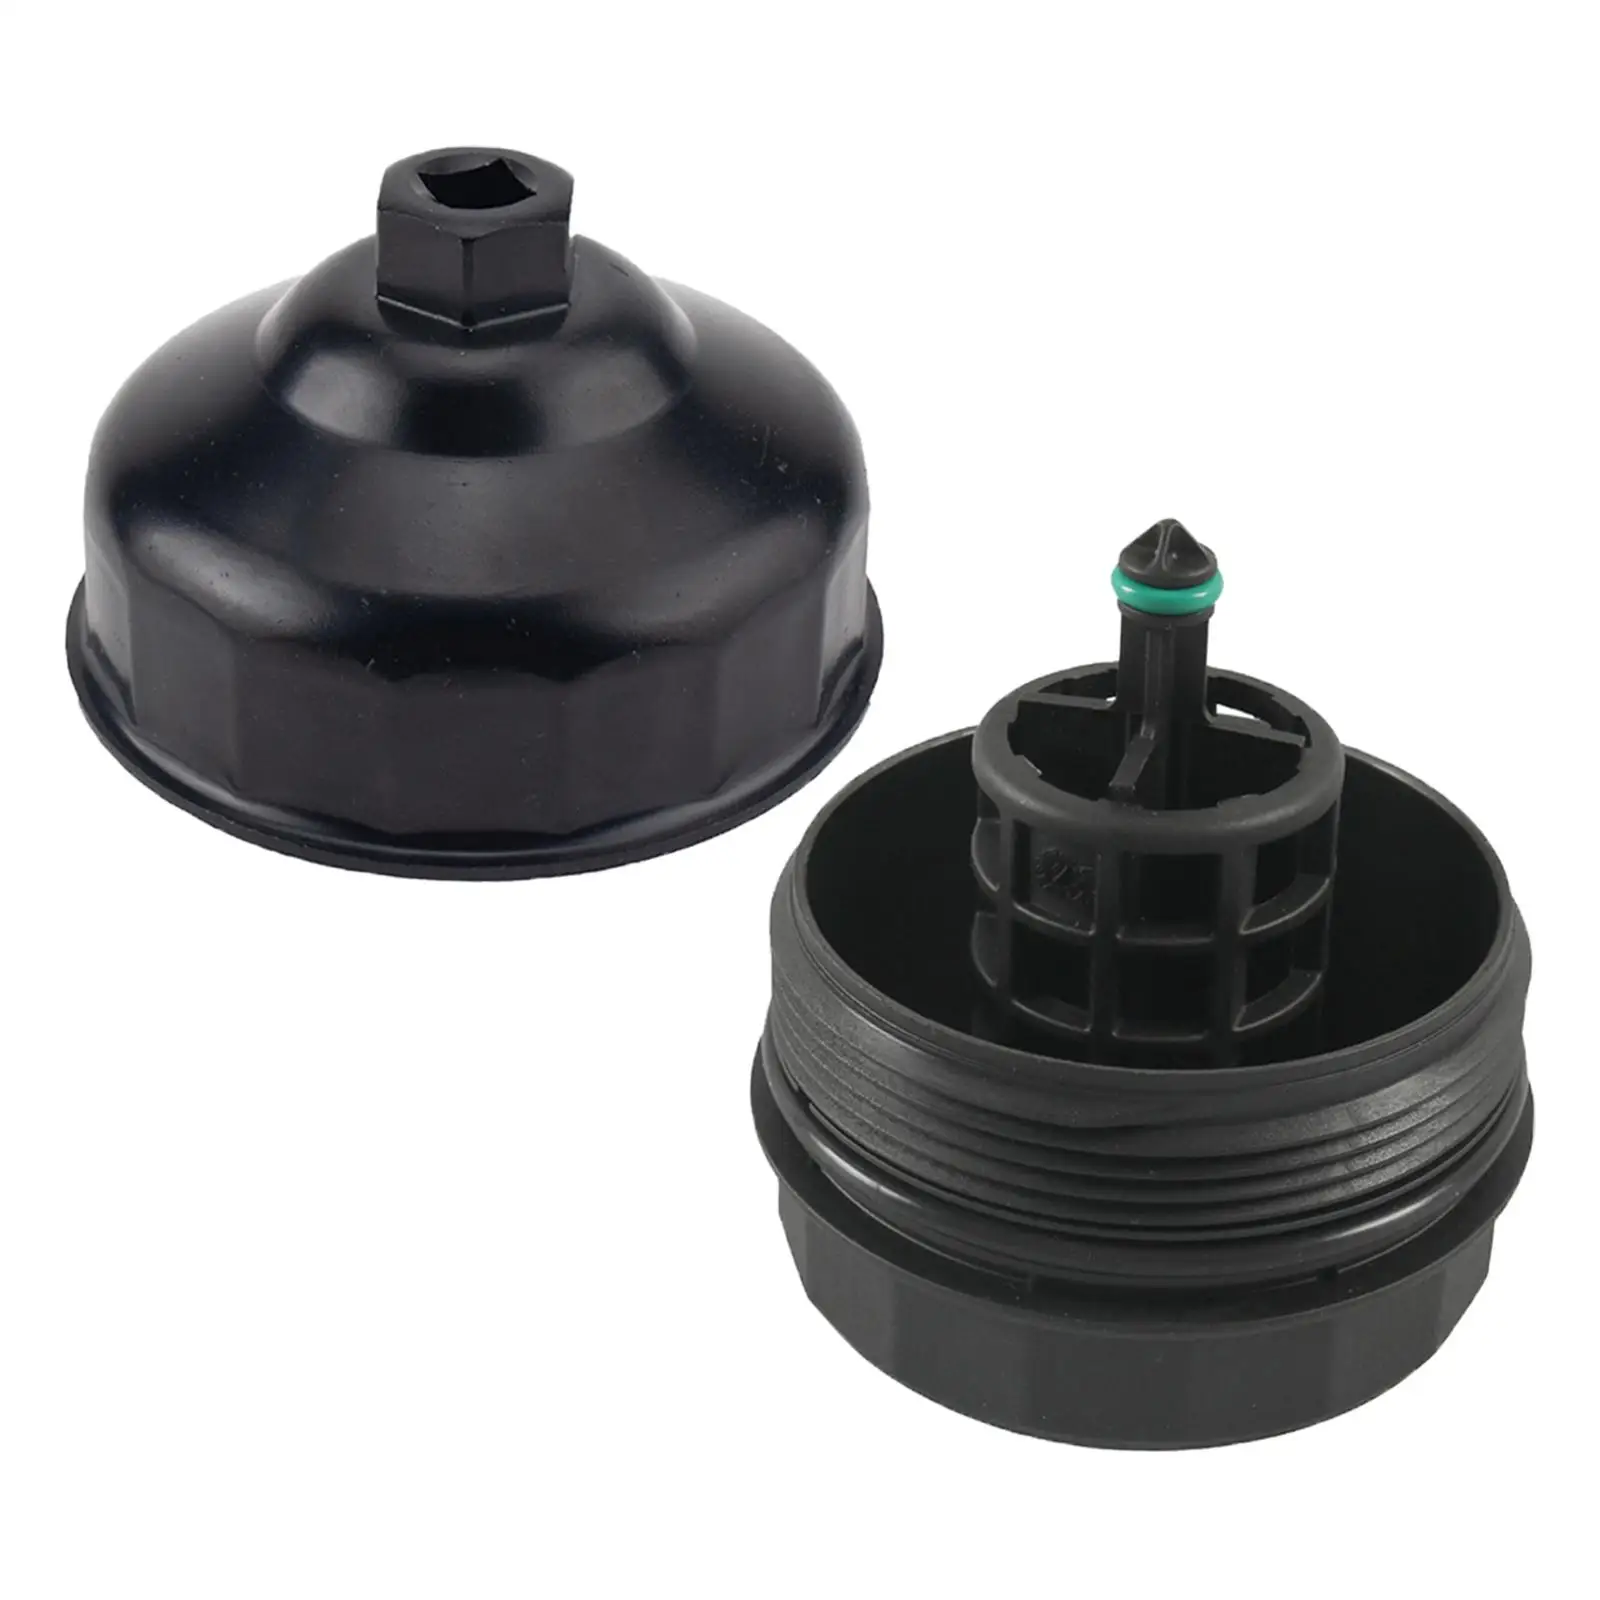 Oil Filter Housing Cover Caps 11427525334 Replace for BMW Z4 x1 x3 x4 x5 x6 M2 M3 M4 525Xi 528i